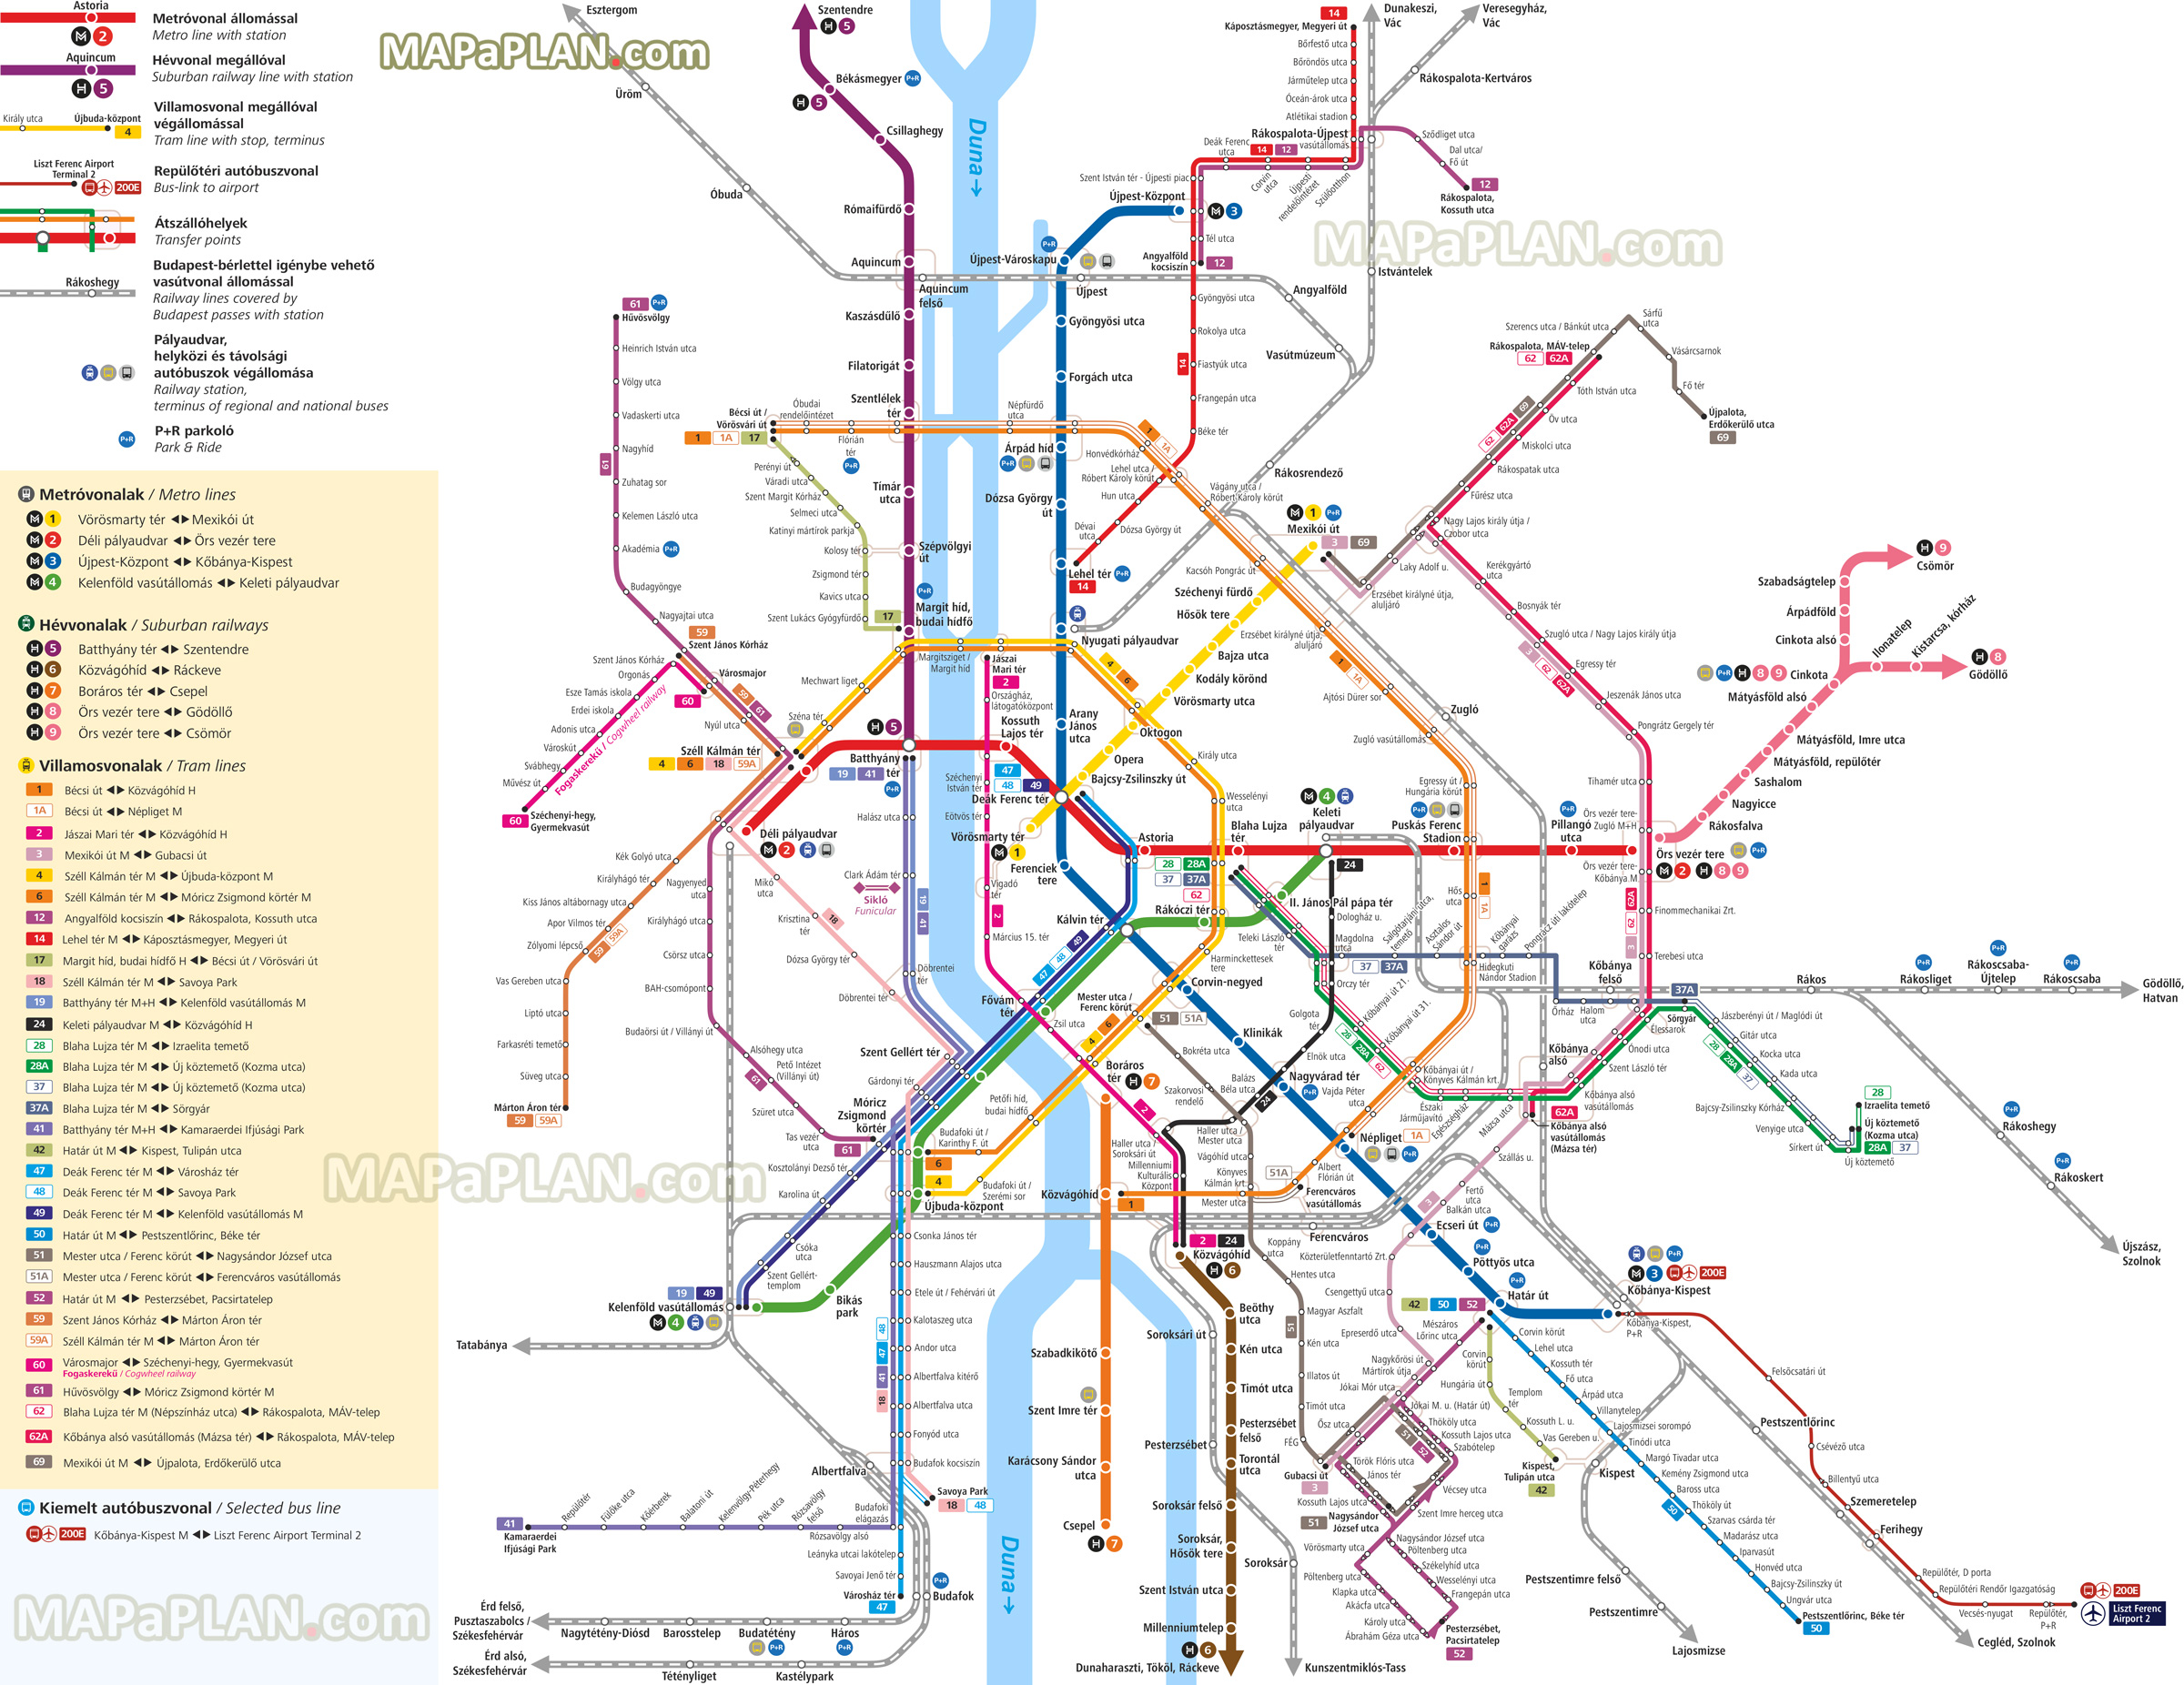 Budapest Map Metro Subway Underground Tube Tram Tramway Stations Suburban Hev Railway Lines Bkk Public Transport System Network With Liszt Ferenc Airport Terminal Link